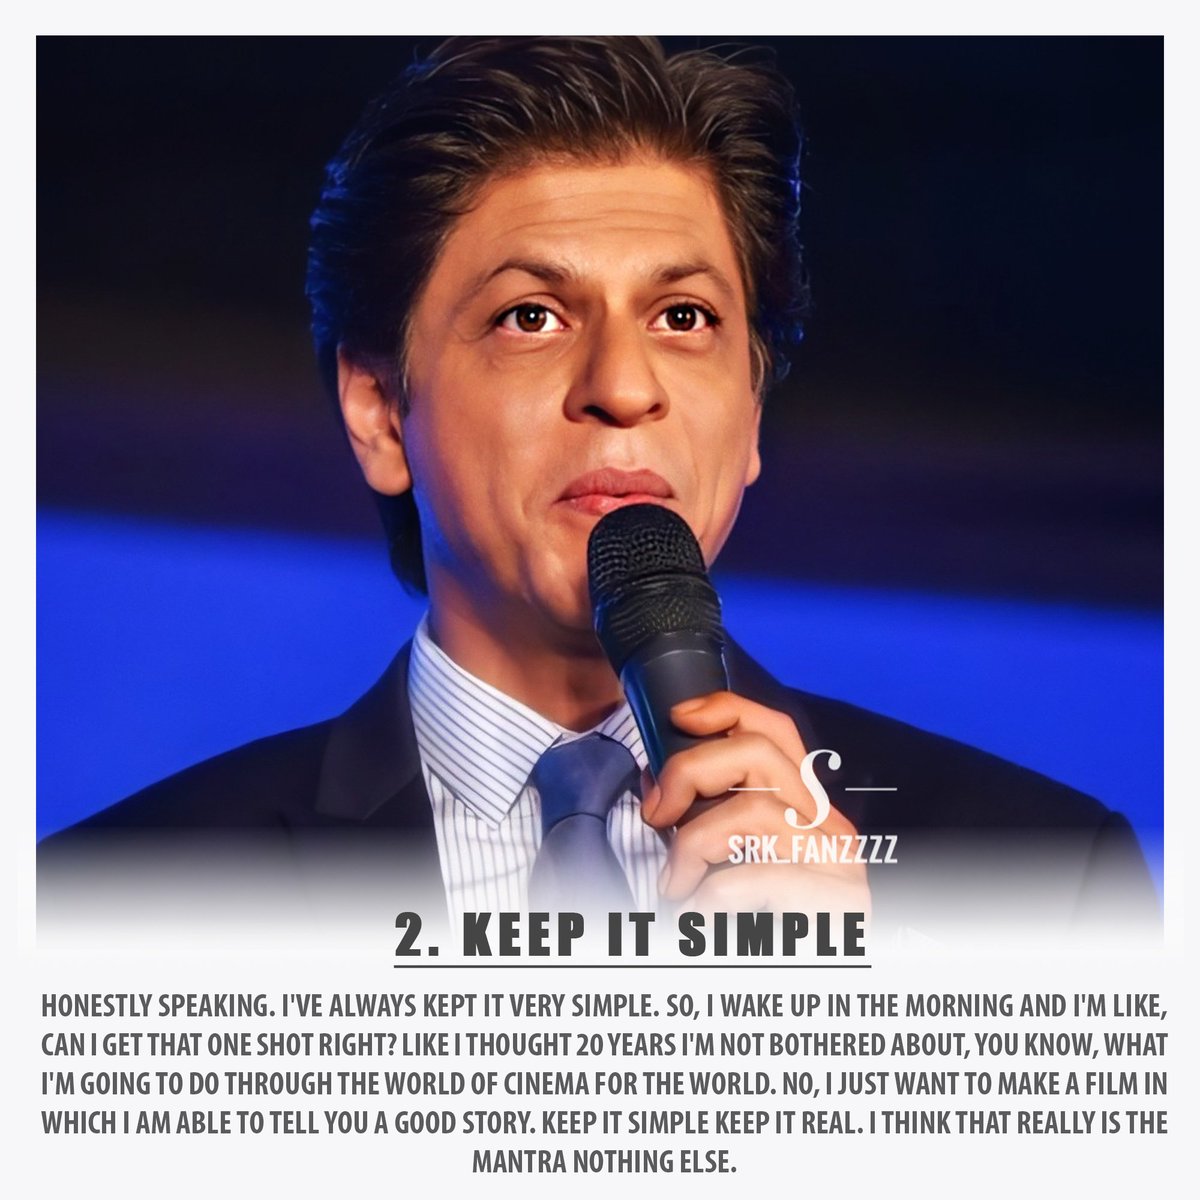 SRK has always been an inspiration. He has taught us useful things not only via films or speeches, but his complete life is an inspiration.For those who need it, SHAH RUKH KHAN'S TOP 13 RULES FOR SUCCESS (1/4) @iamsrk  #HappyTeachersDay #ShahRukhKhan